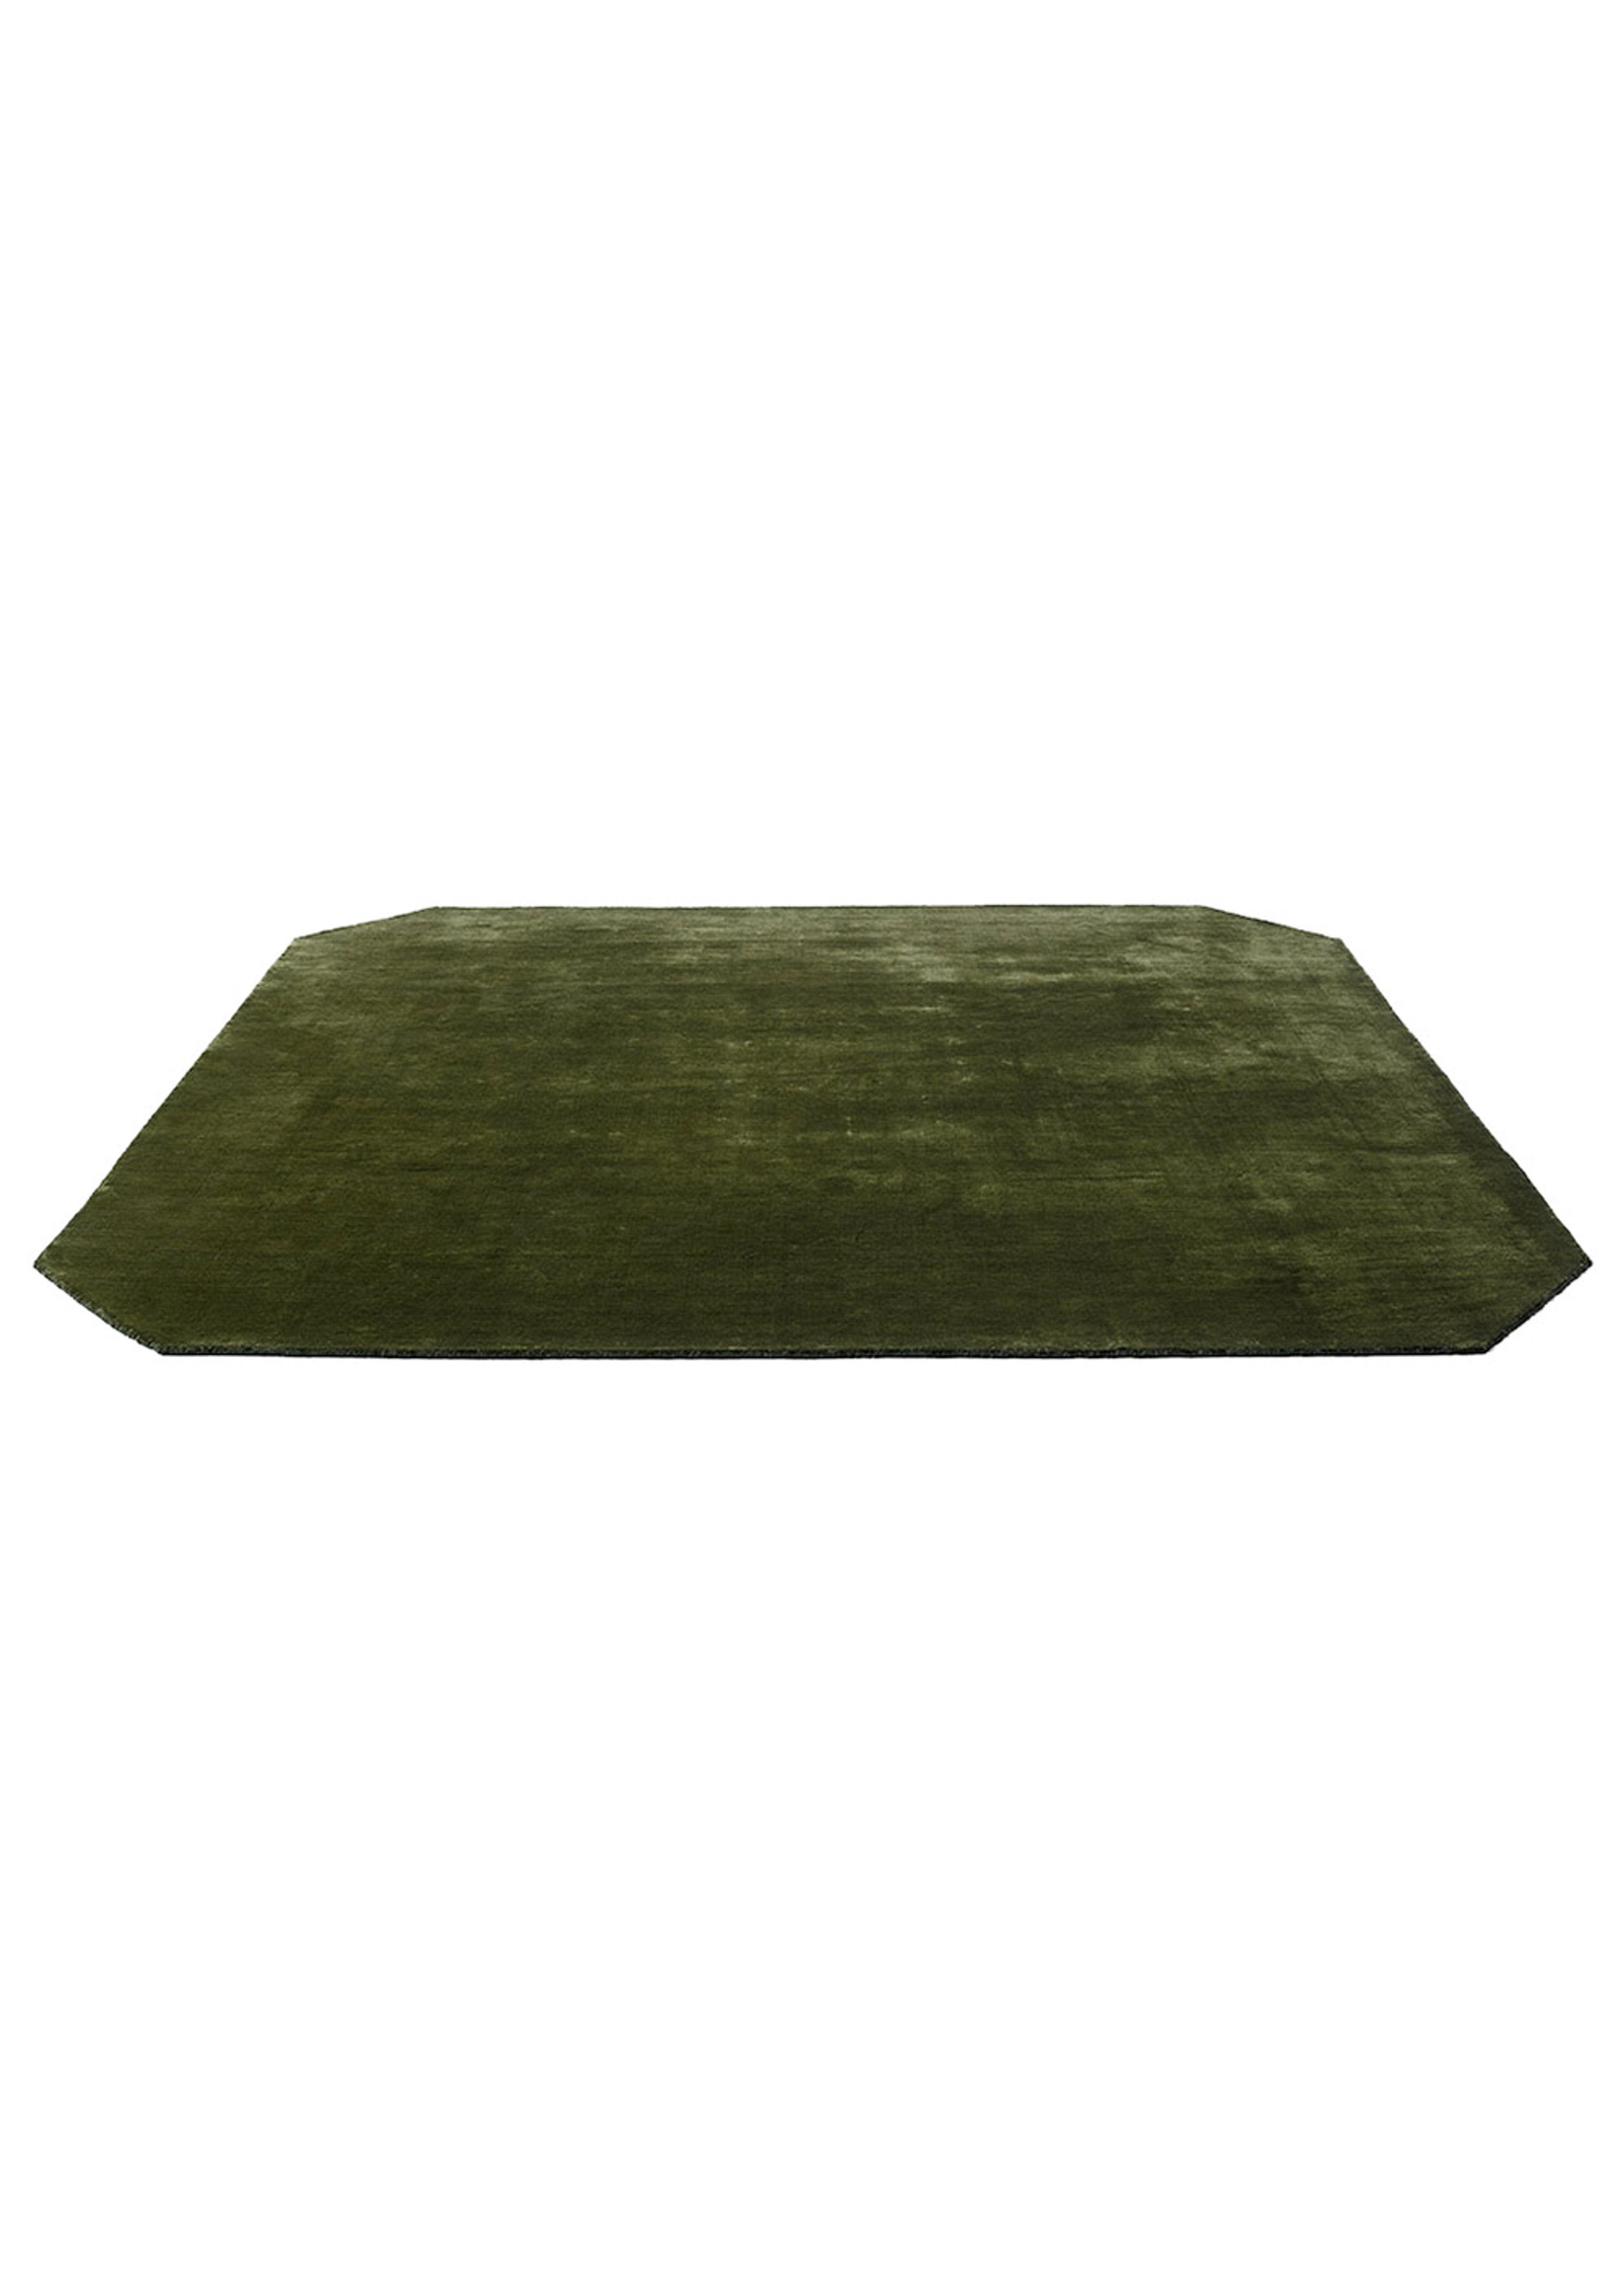 &tradition - Tapis - The Moor Rug - Green Pine / AP8